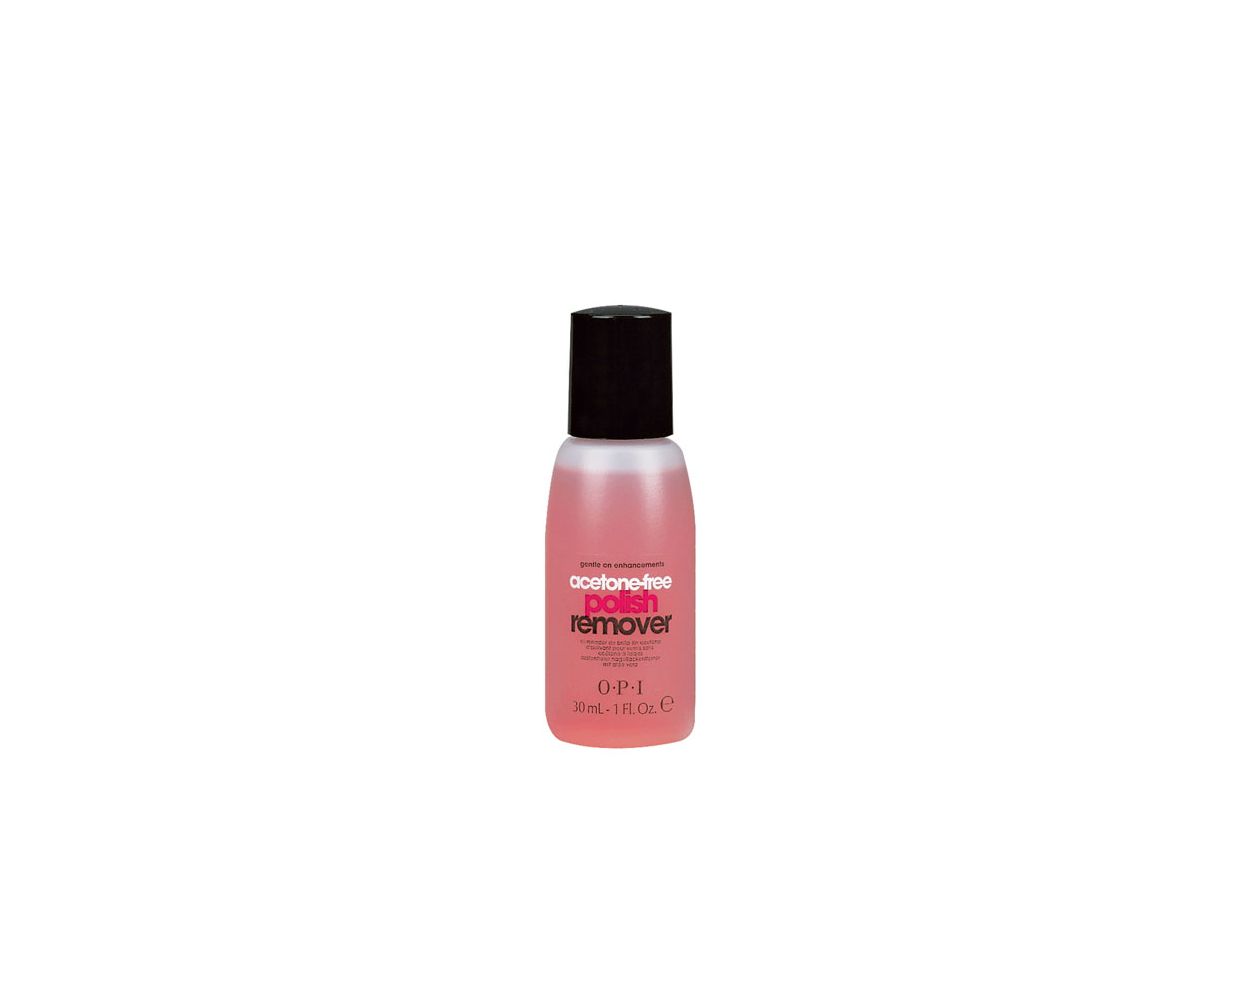 OPI ACETONE FREE REMOVER 30ml